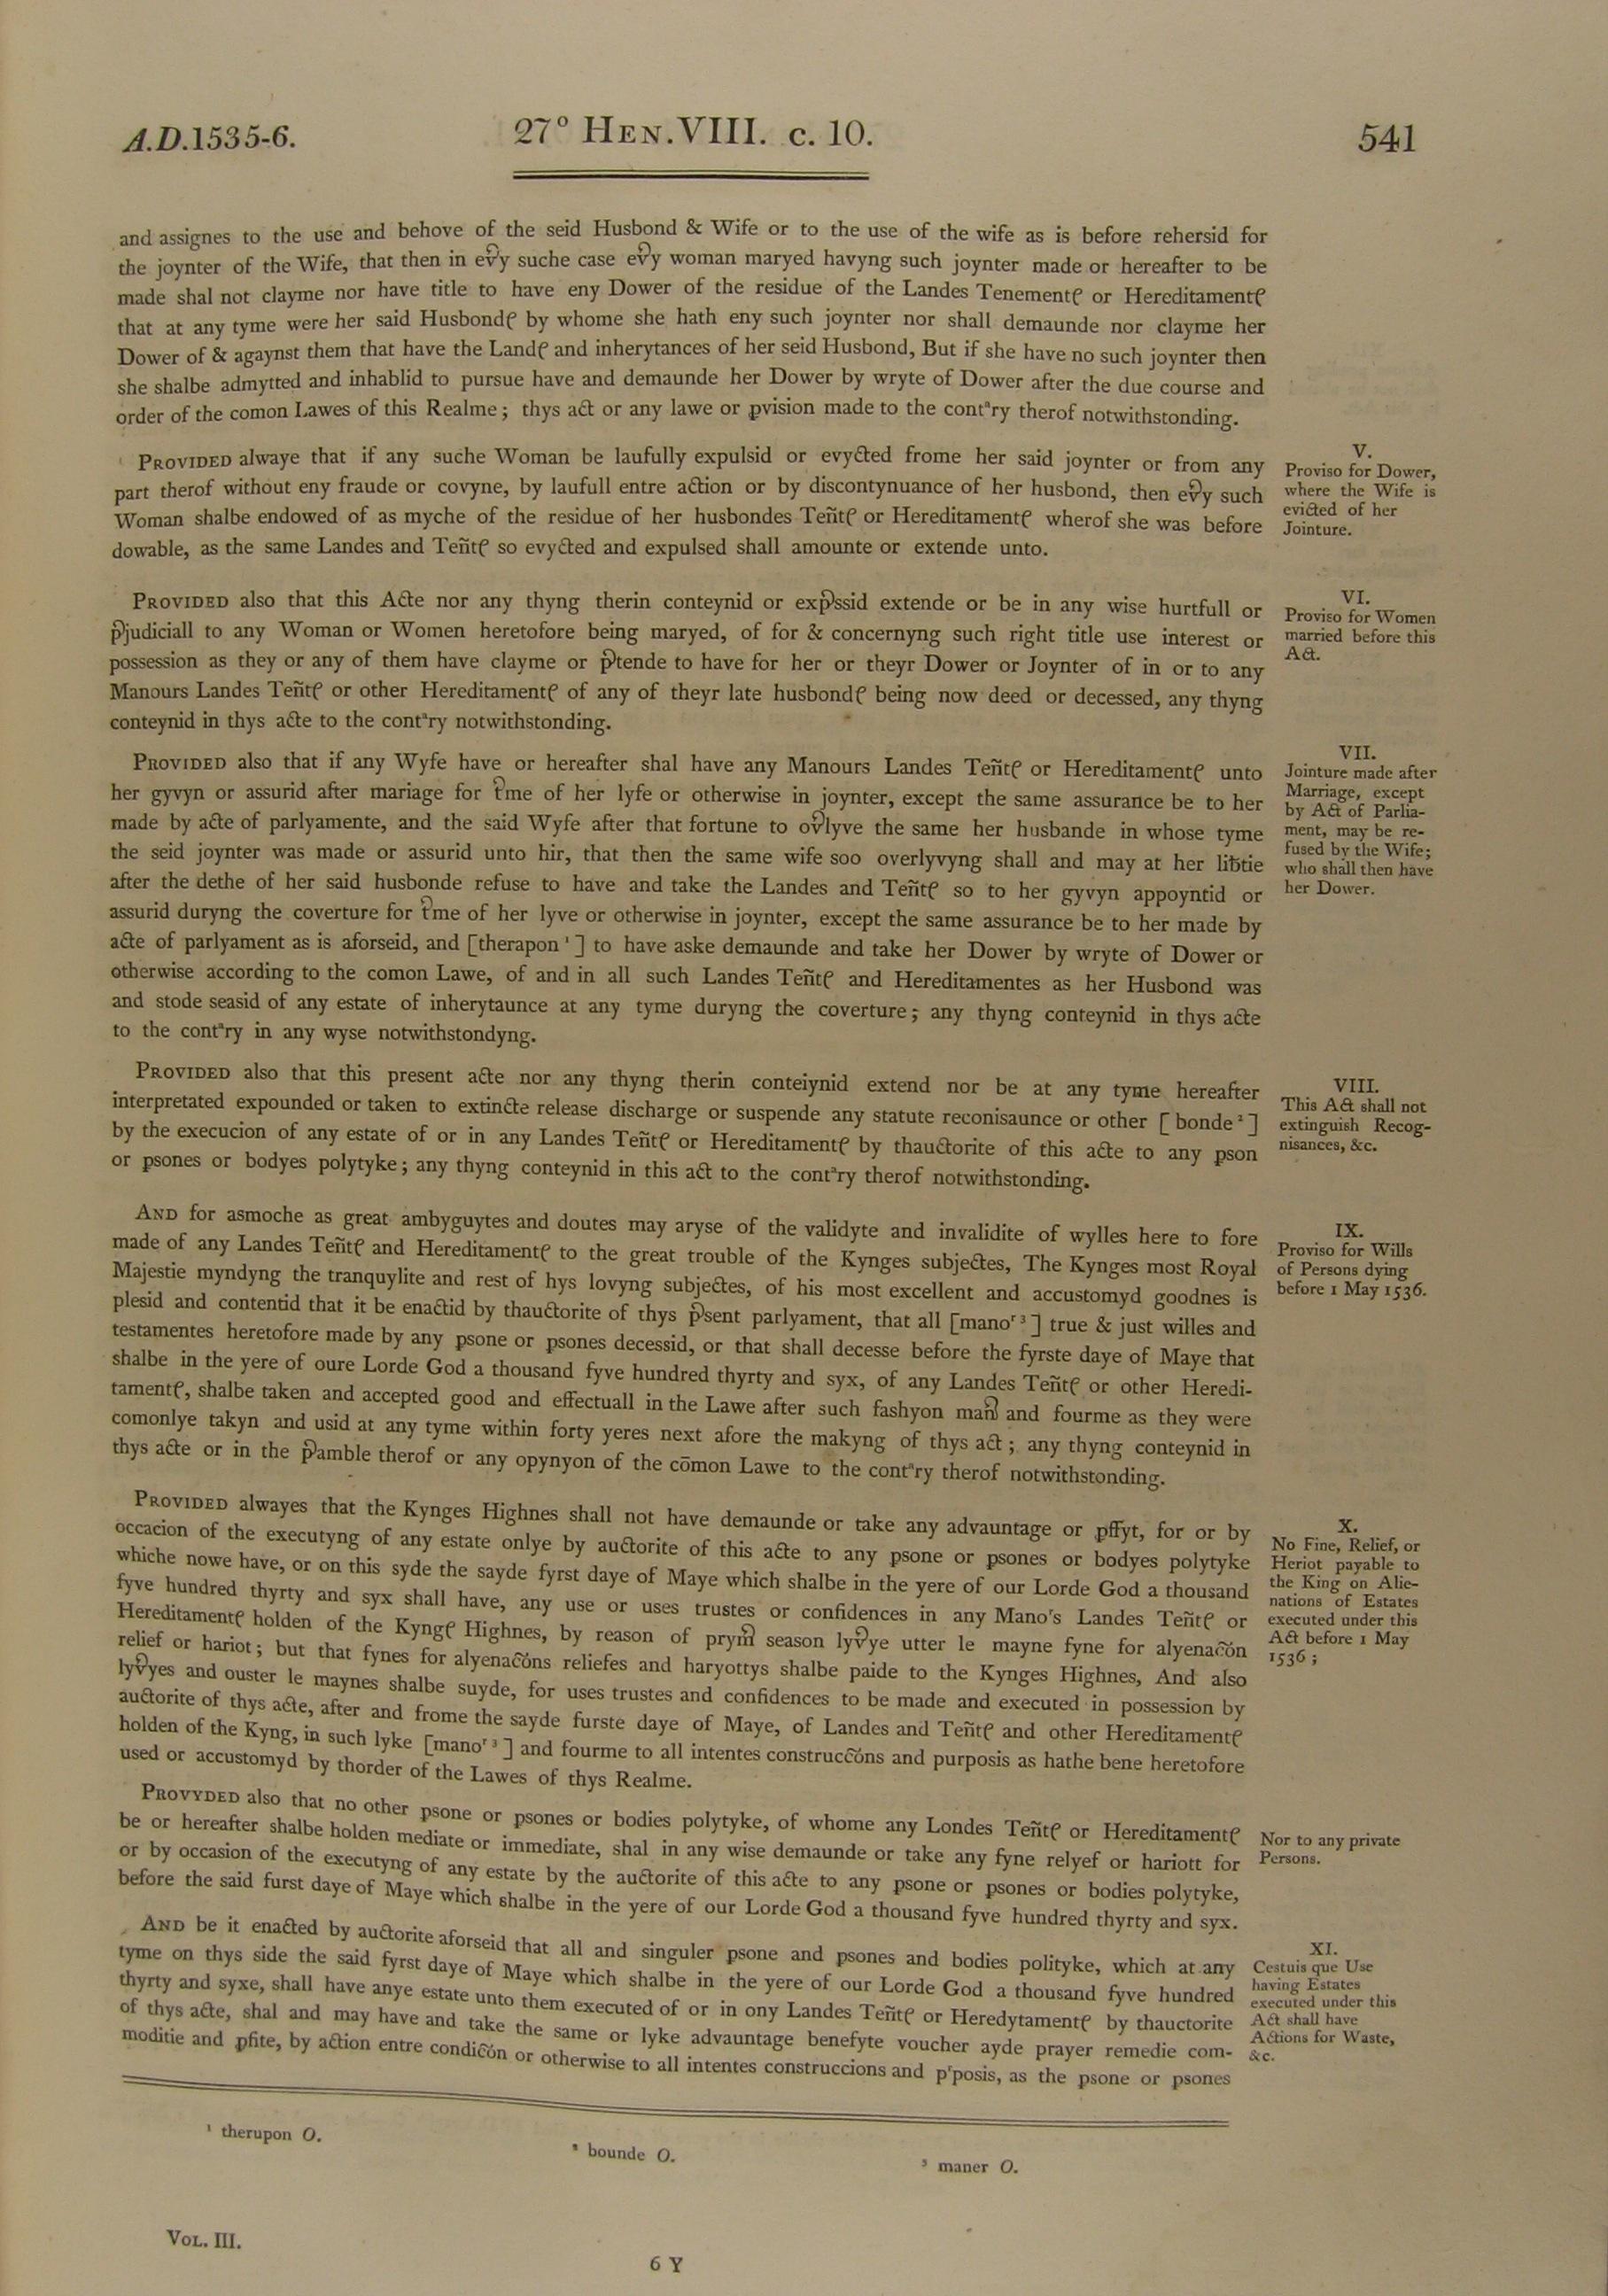 Image of 27 Henry VIII, c. 10 (page 3 of 4). Click for larger image.